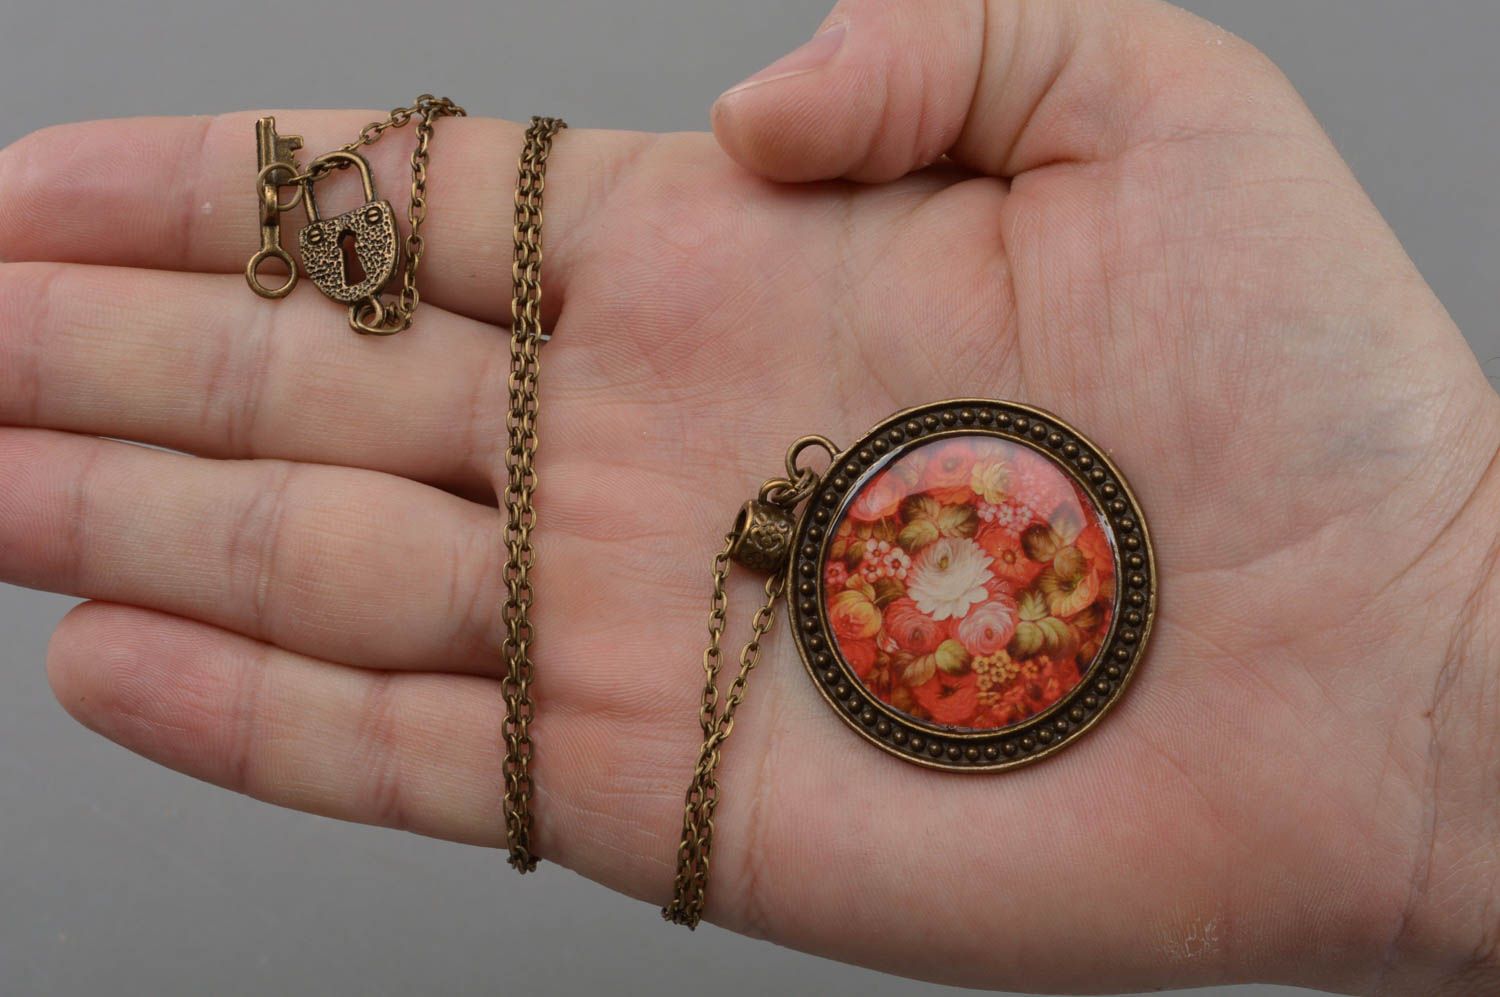 Handmade round decoupage pendant necklace with floral image in jewelry resin photo 4